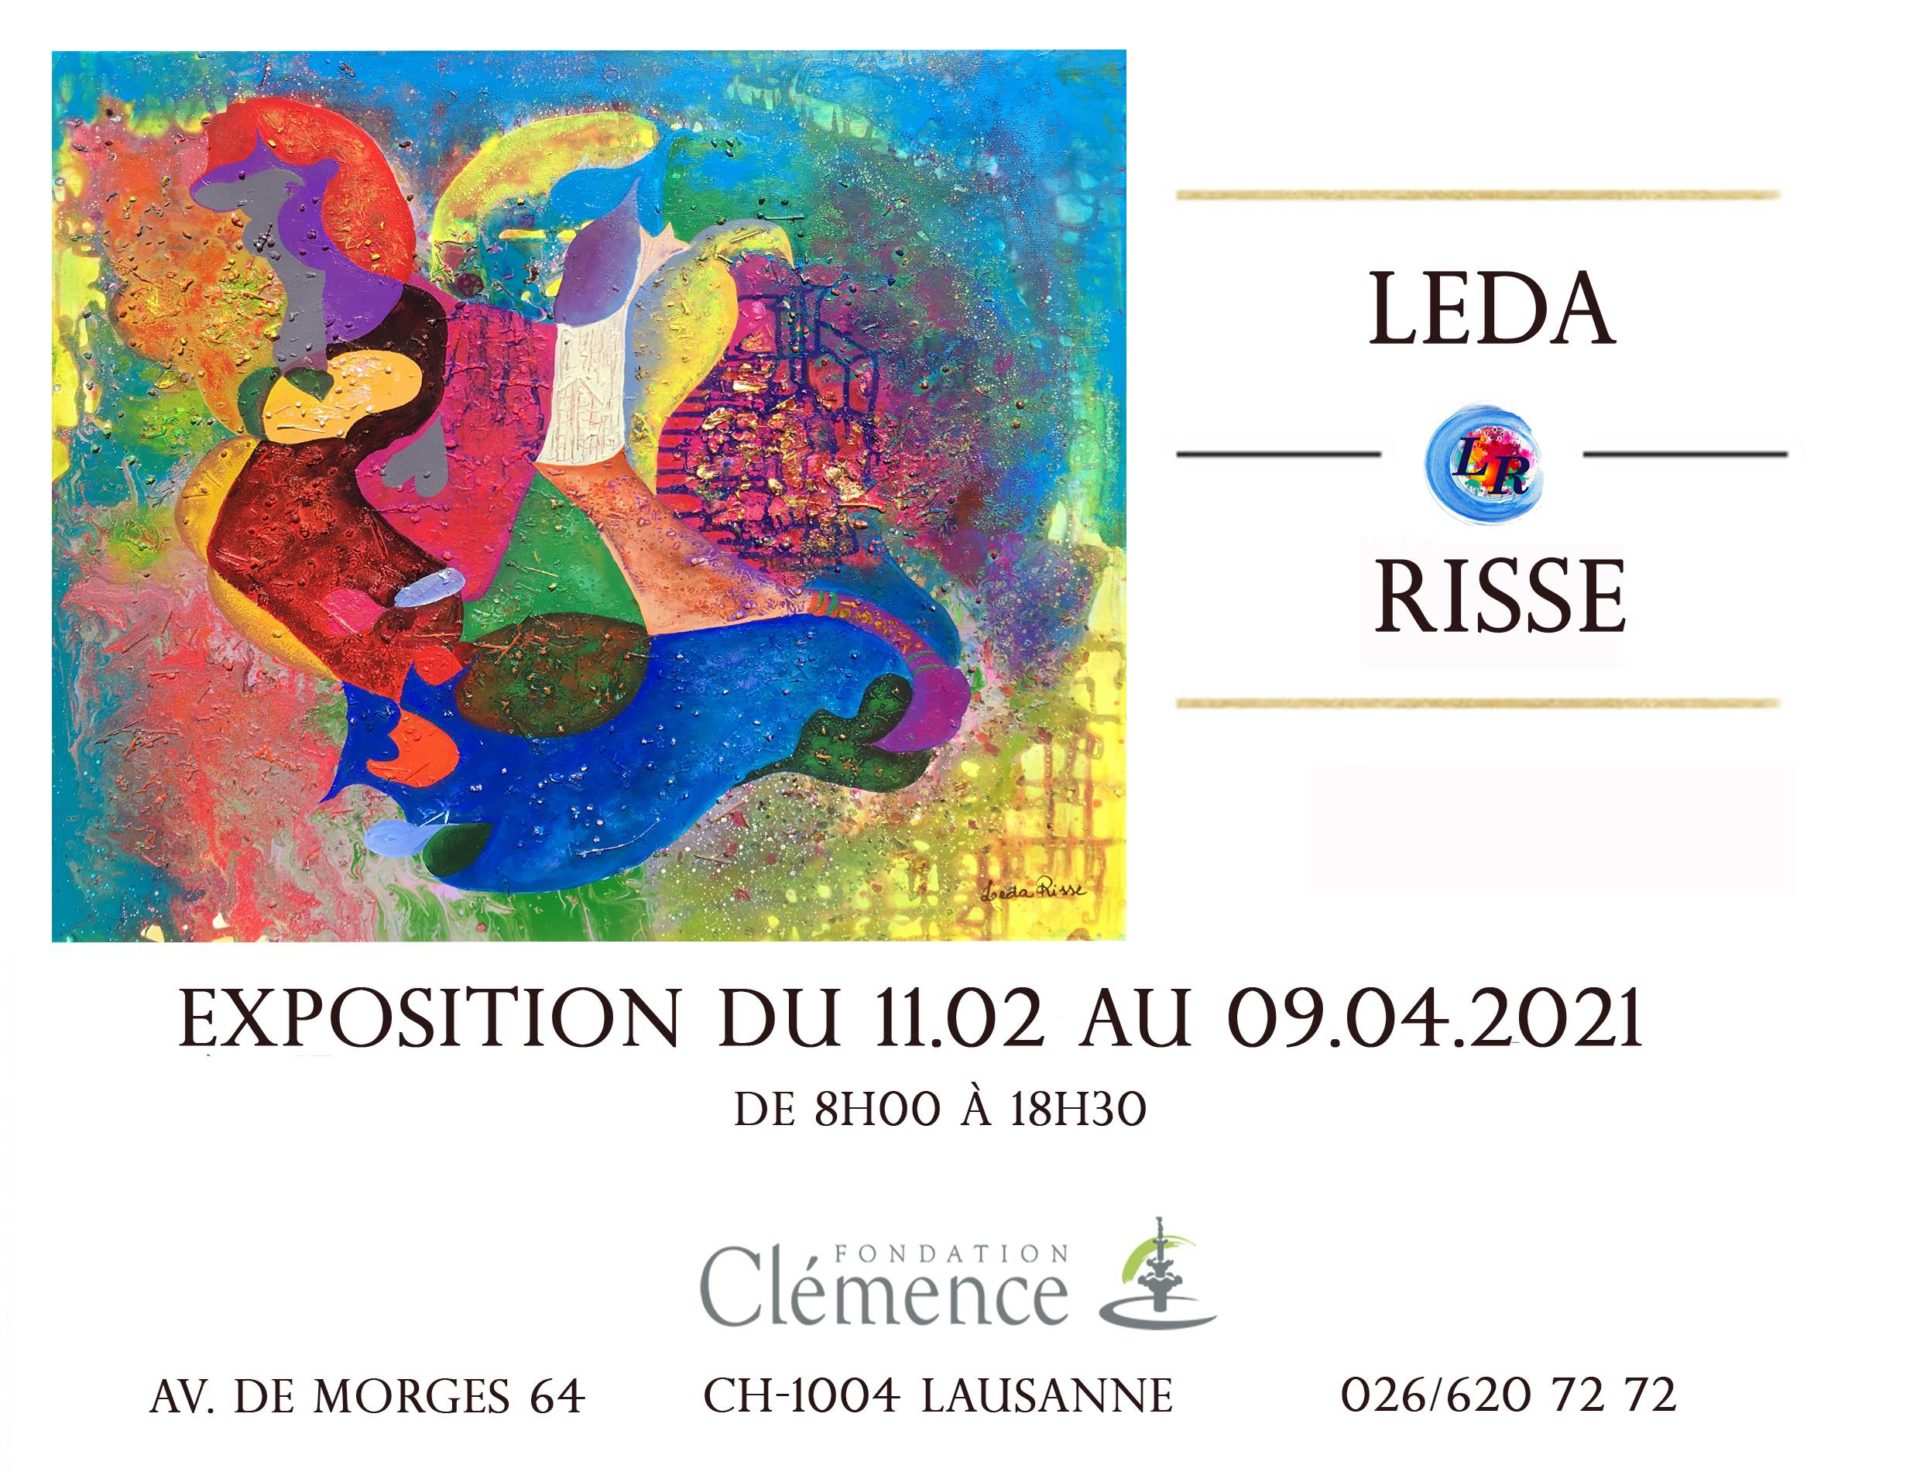 Fabled Gallery Leda Risse Fondation Clemence https://fabledgallery.art/event/leda-risse-fondation-clemence/